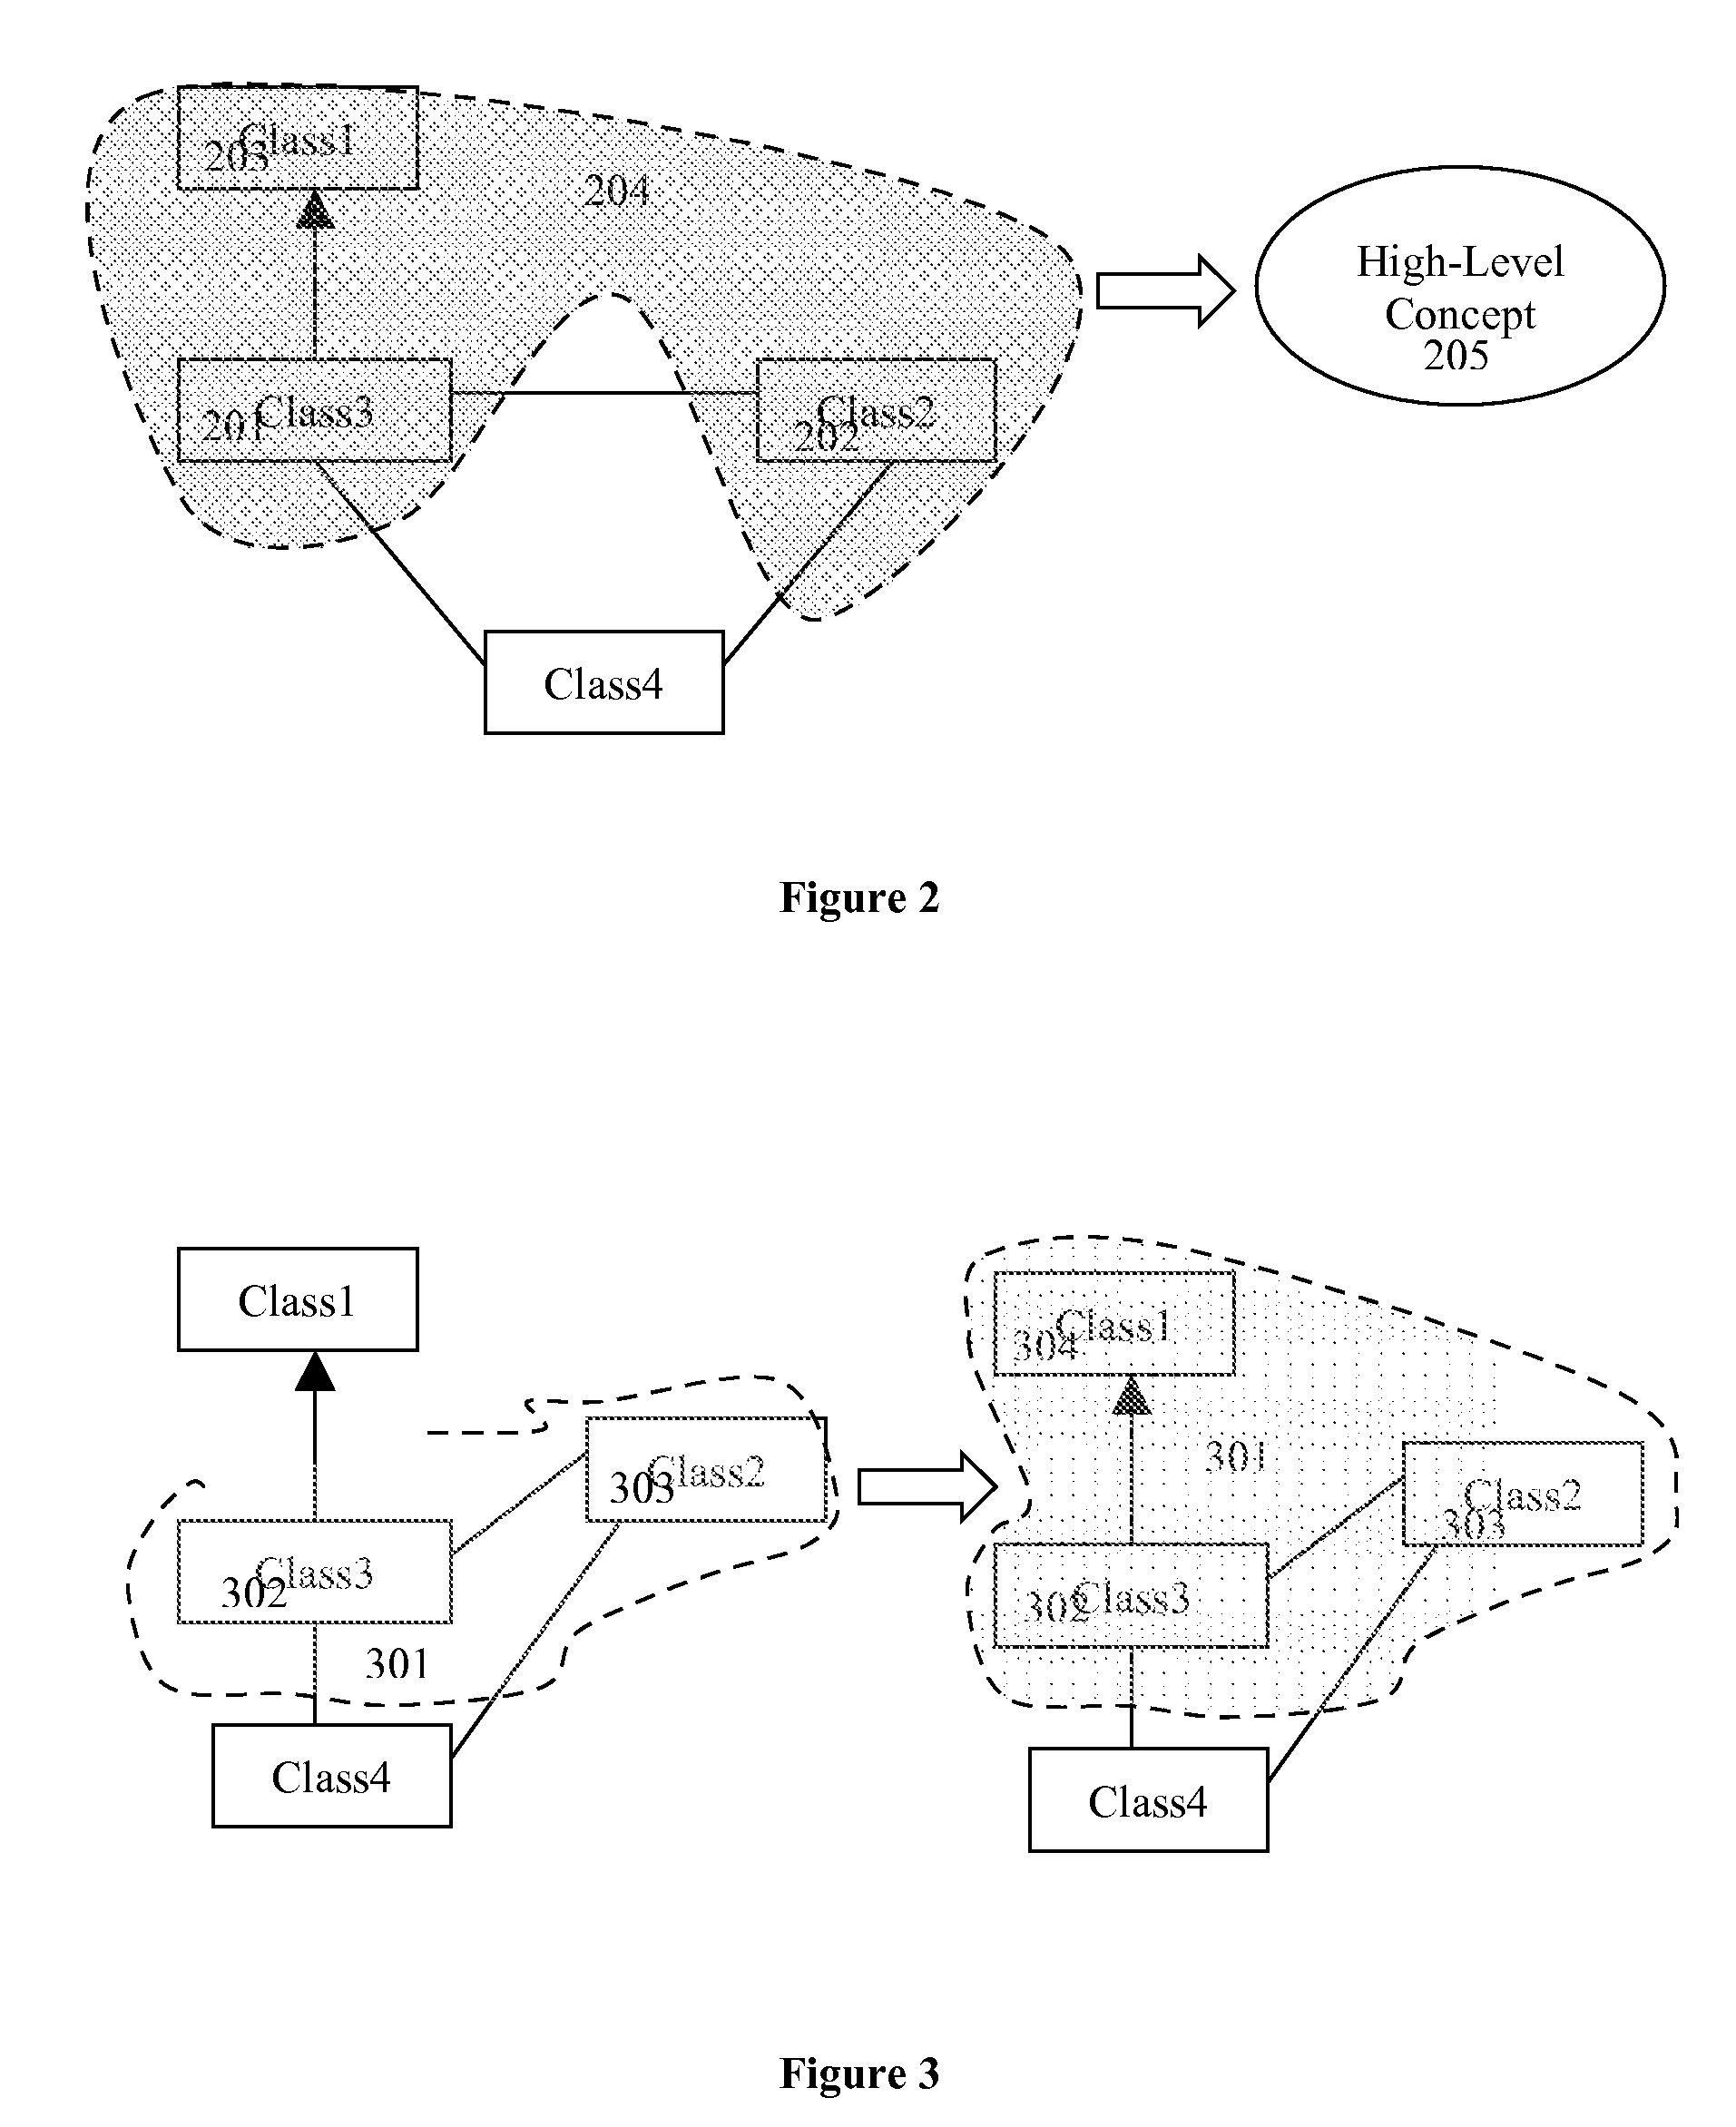 Graphical method of semantic oriented model analysis and transformation design